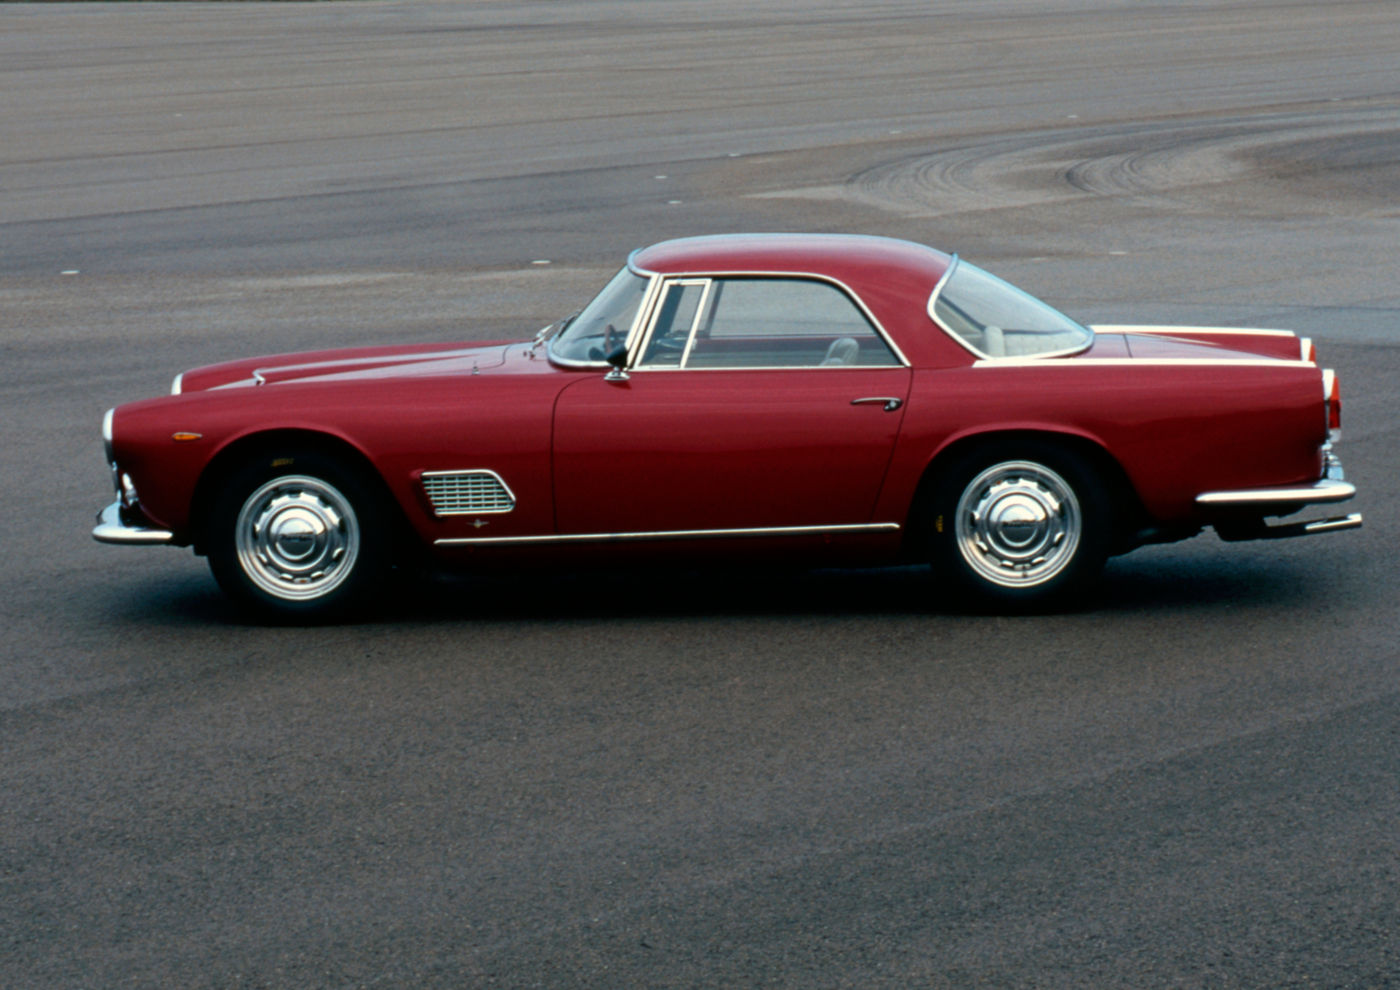 1957 Maserati 3500GT - side view of a red classic car model